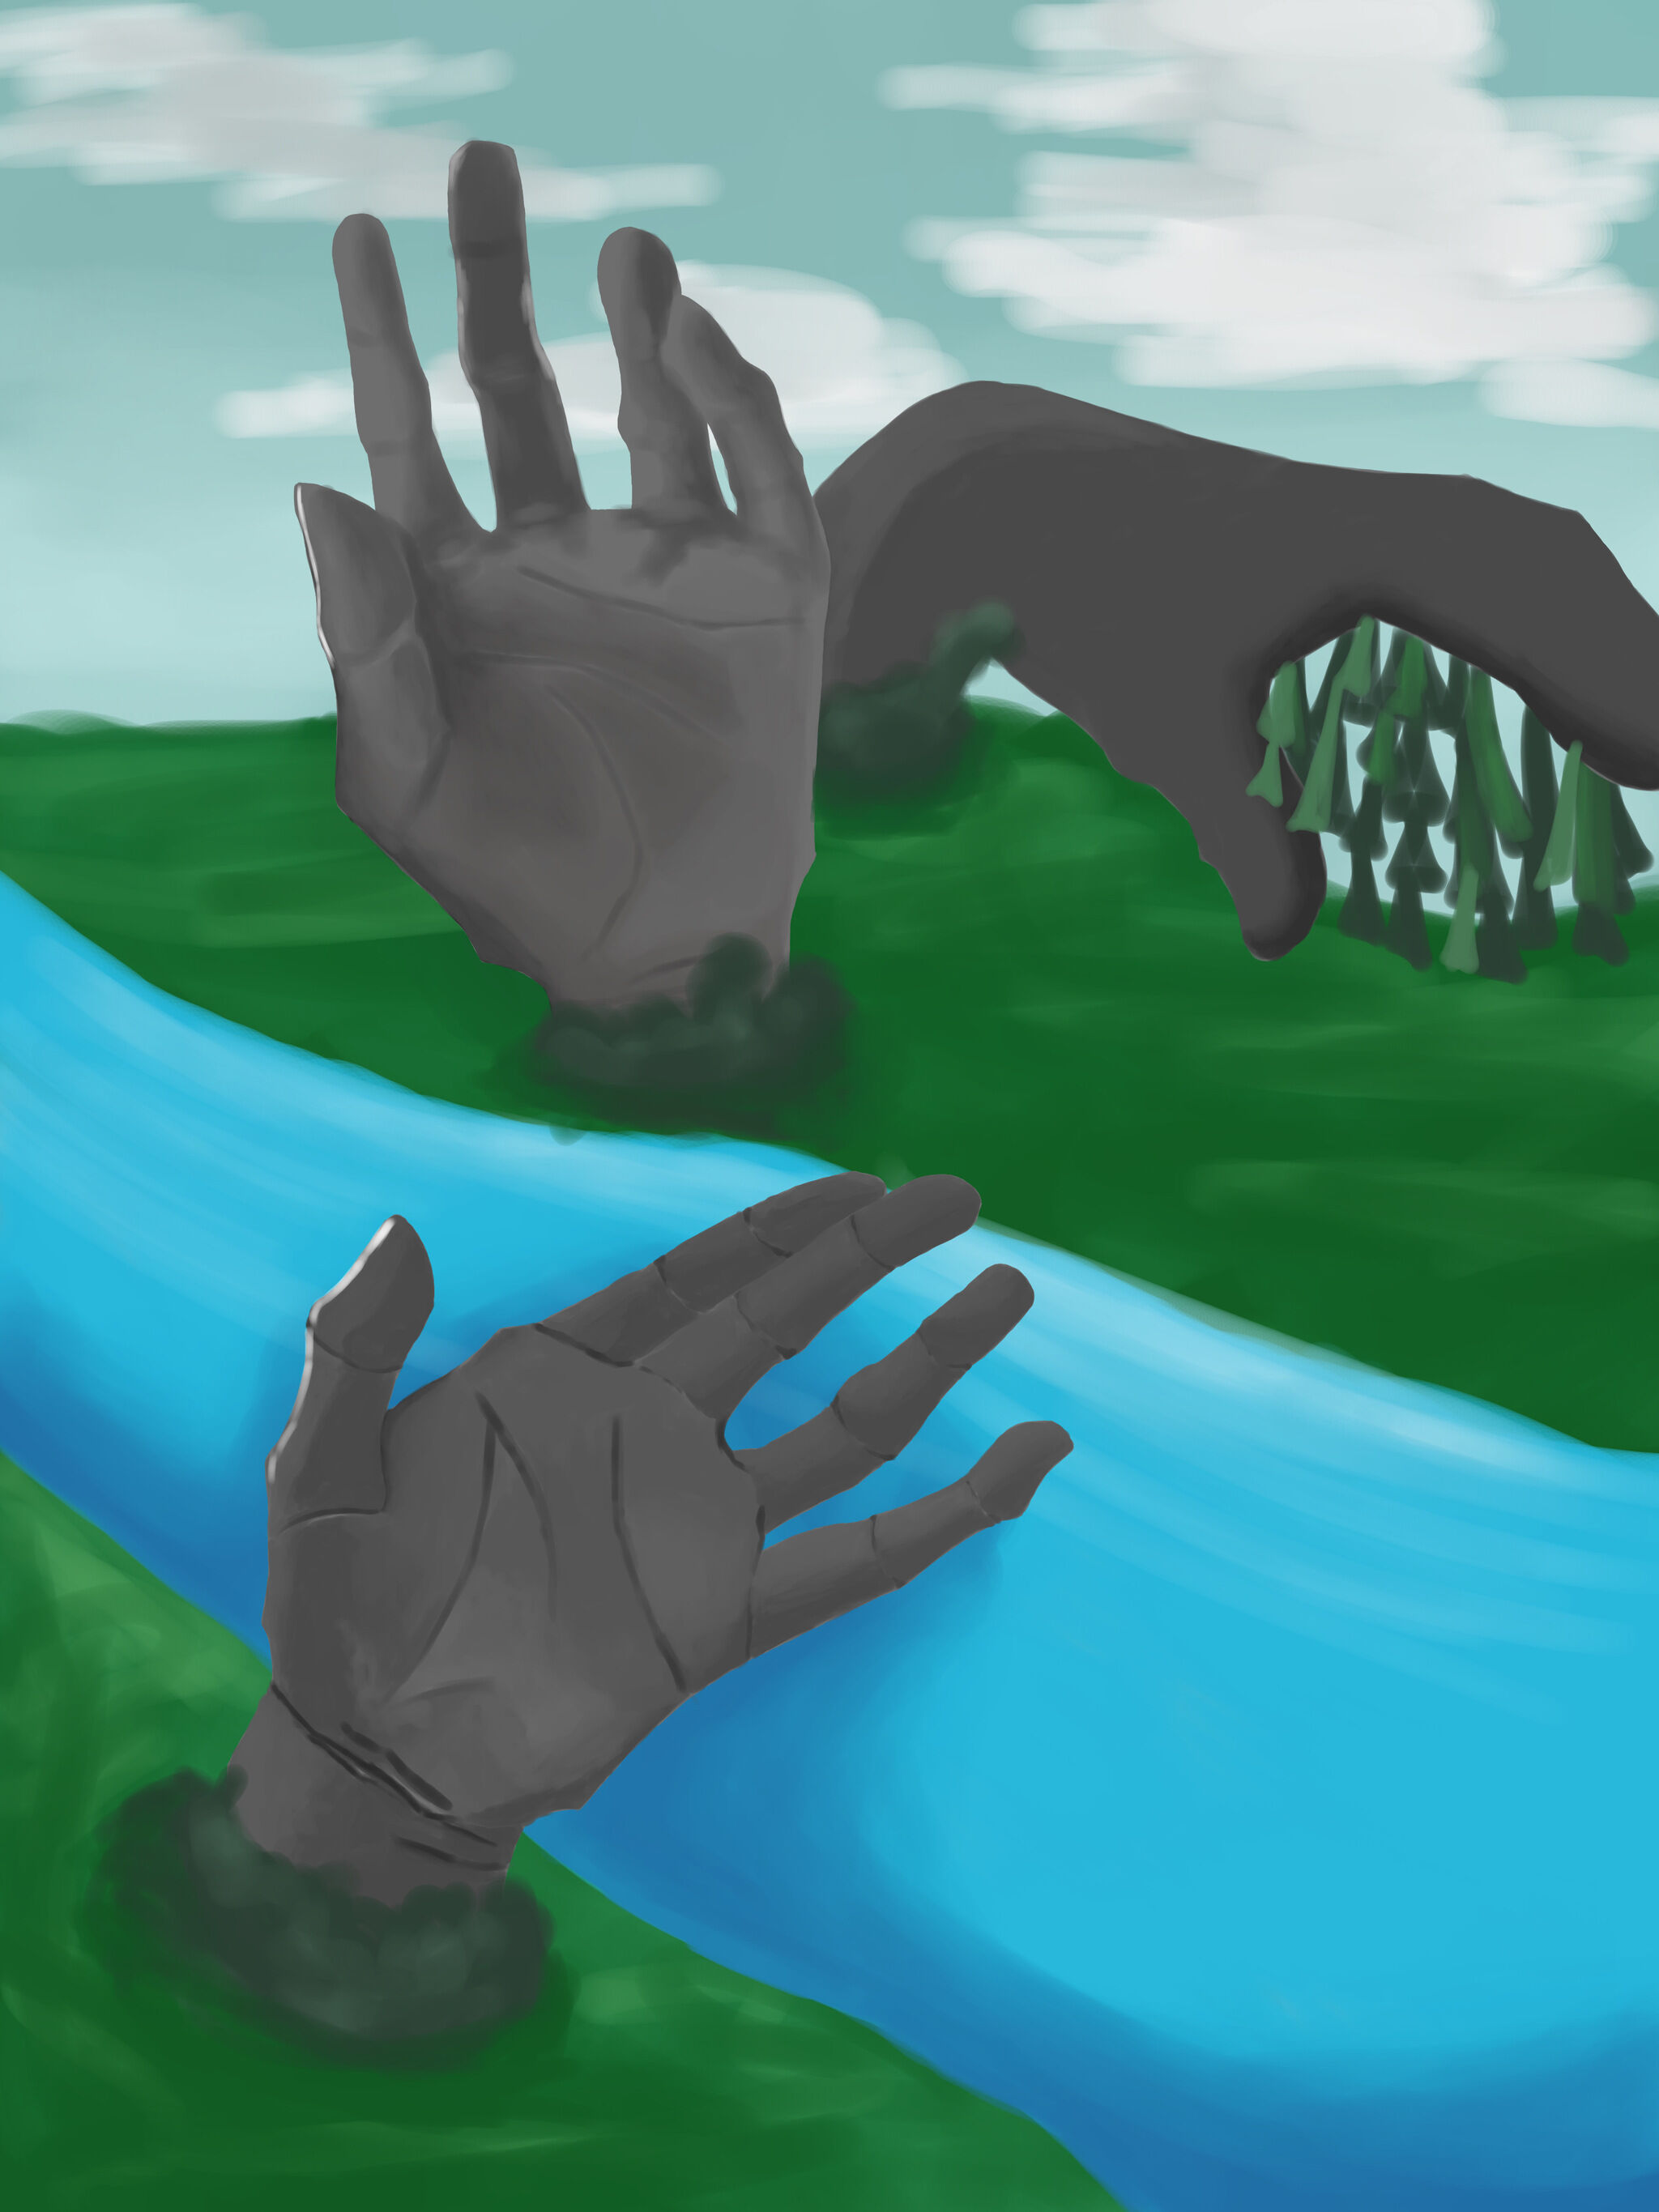 A painting depicting stone-like structures that resemble hands looming over a nearby river.